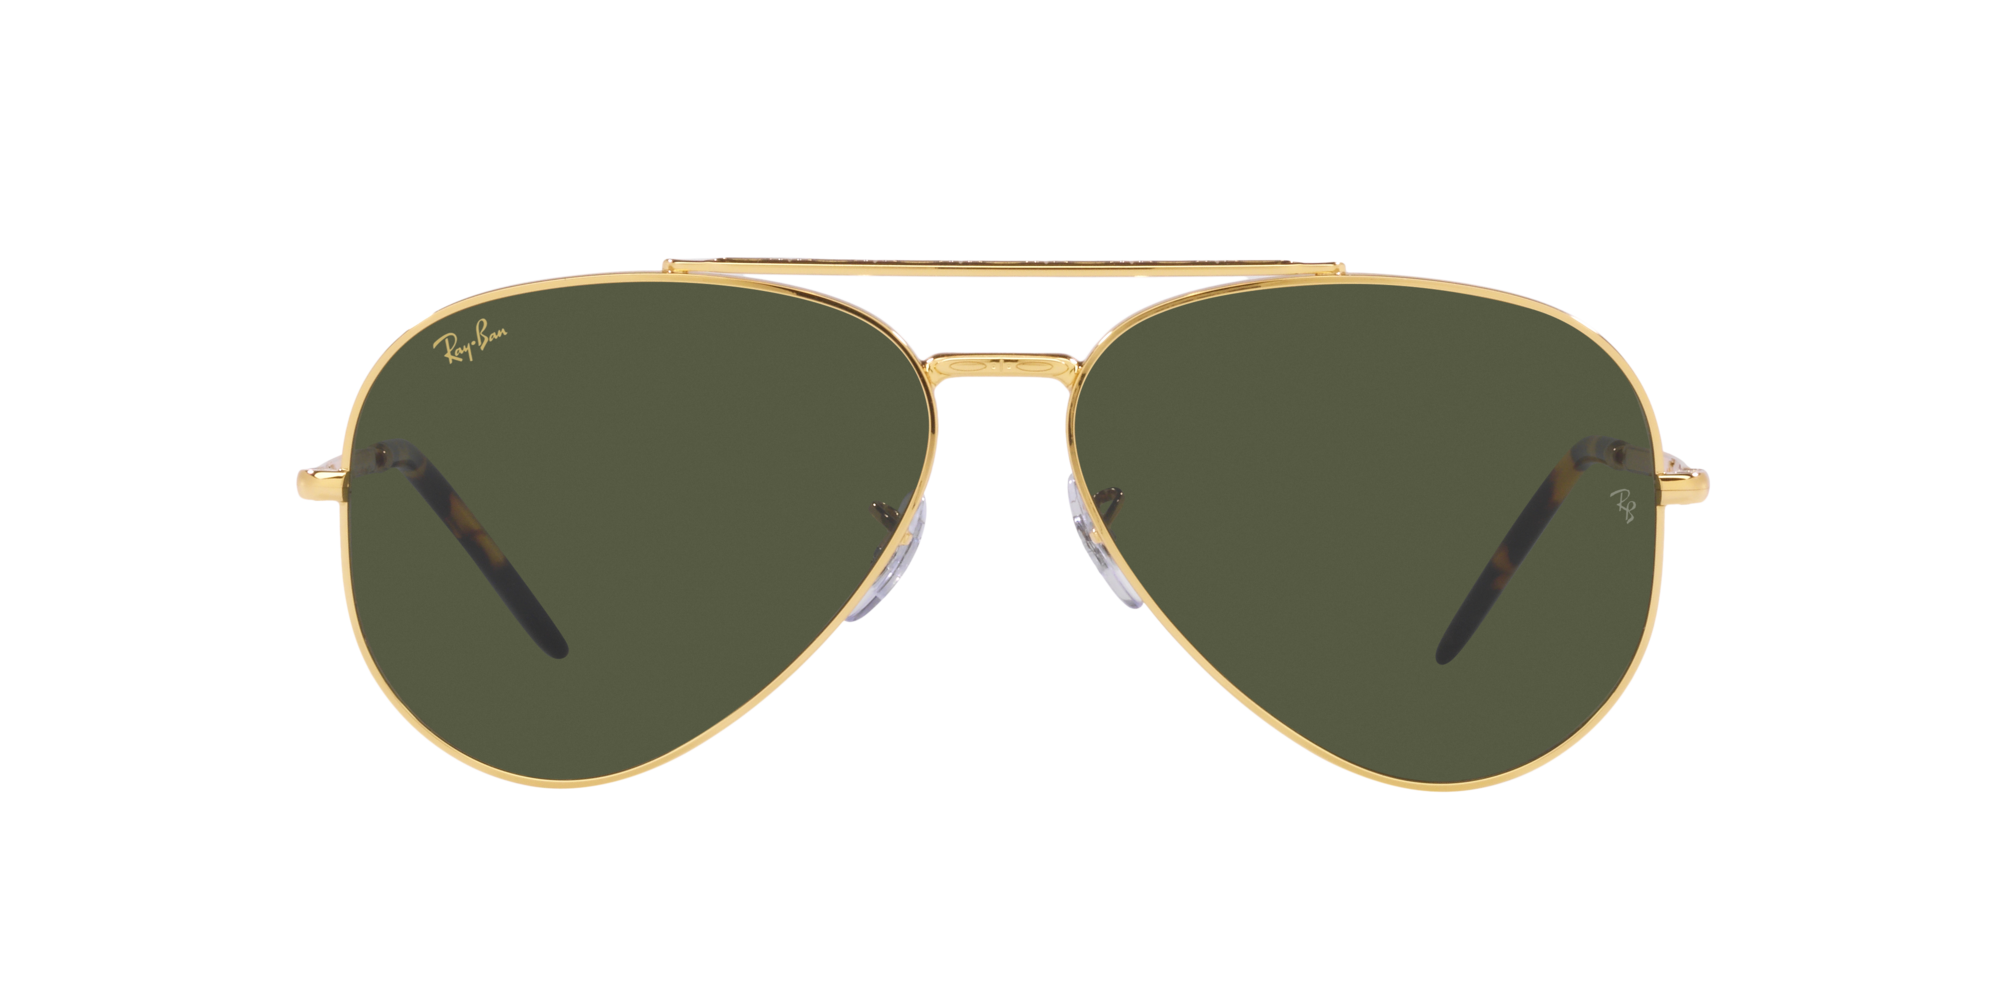 New Aviator Ray Ban Unisex Sonnenbrille in Gold RB3625 919631 58